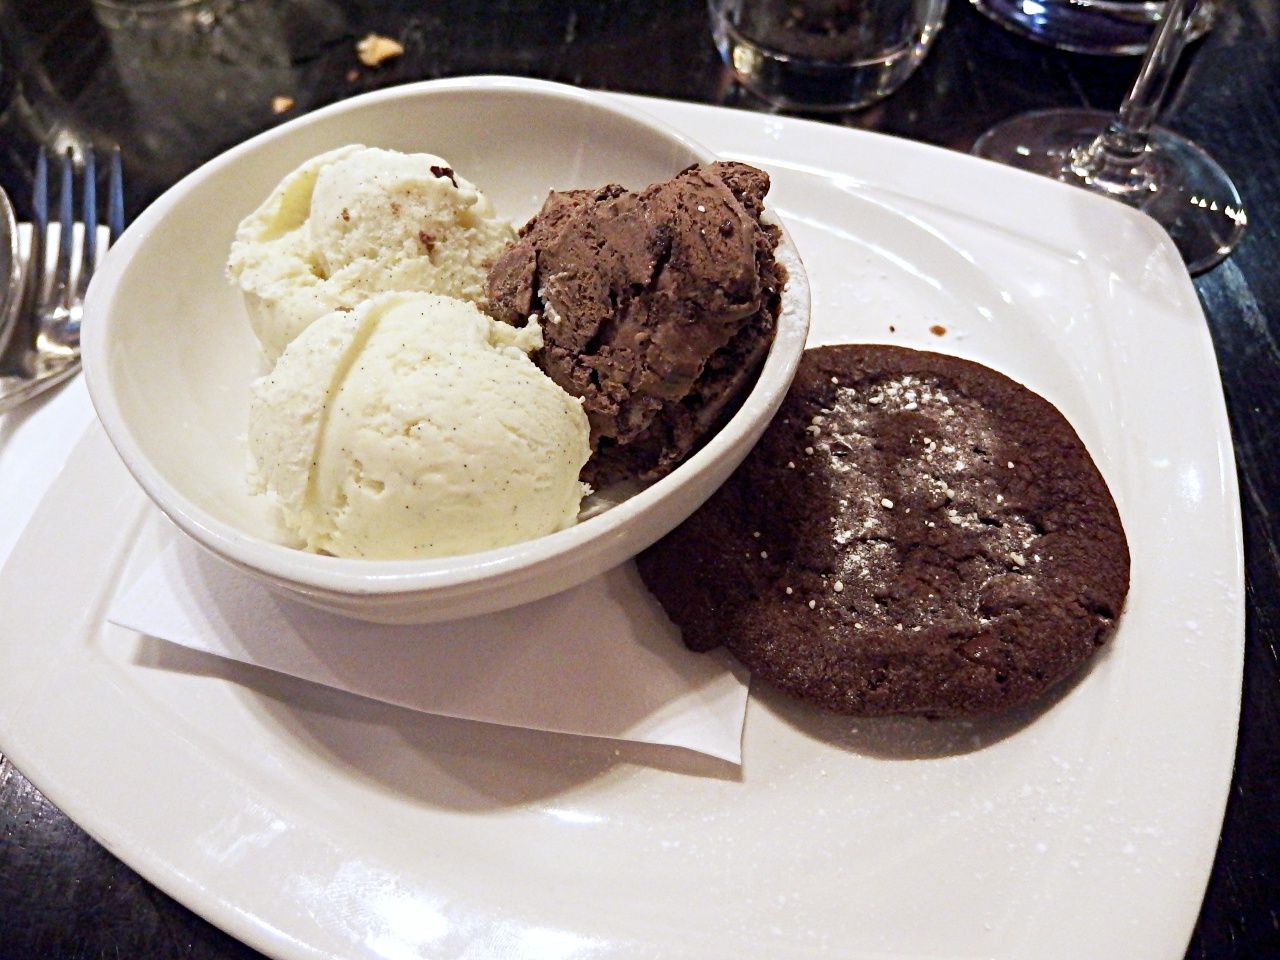 Ice cream and cookie Browns Mayfair